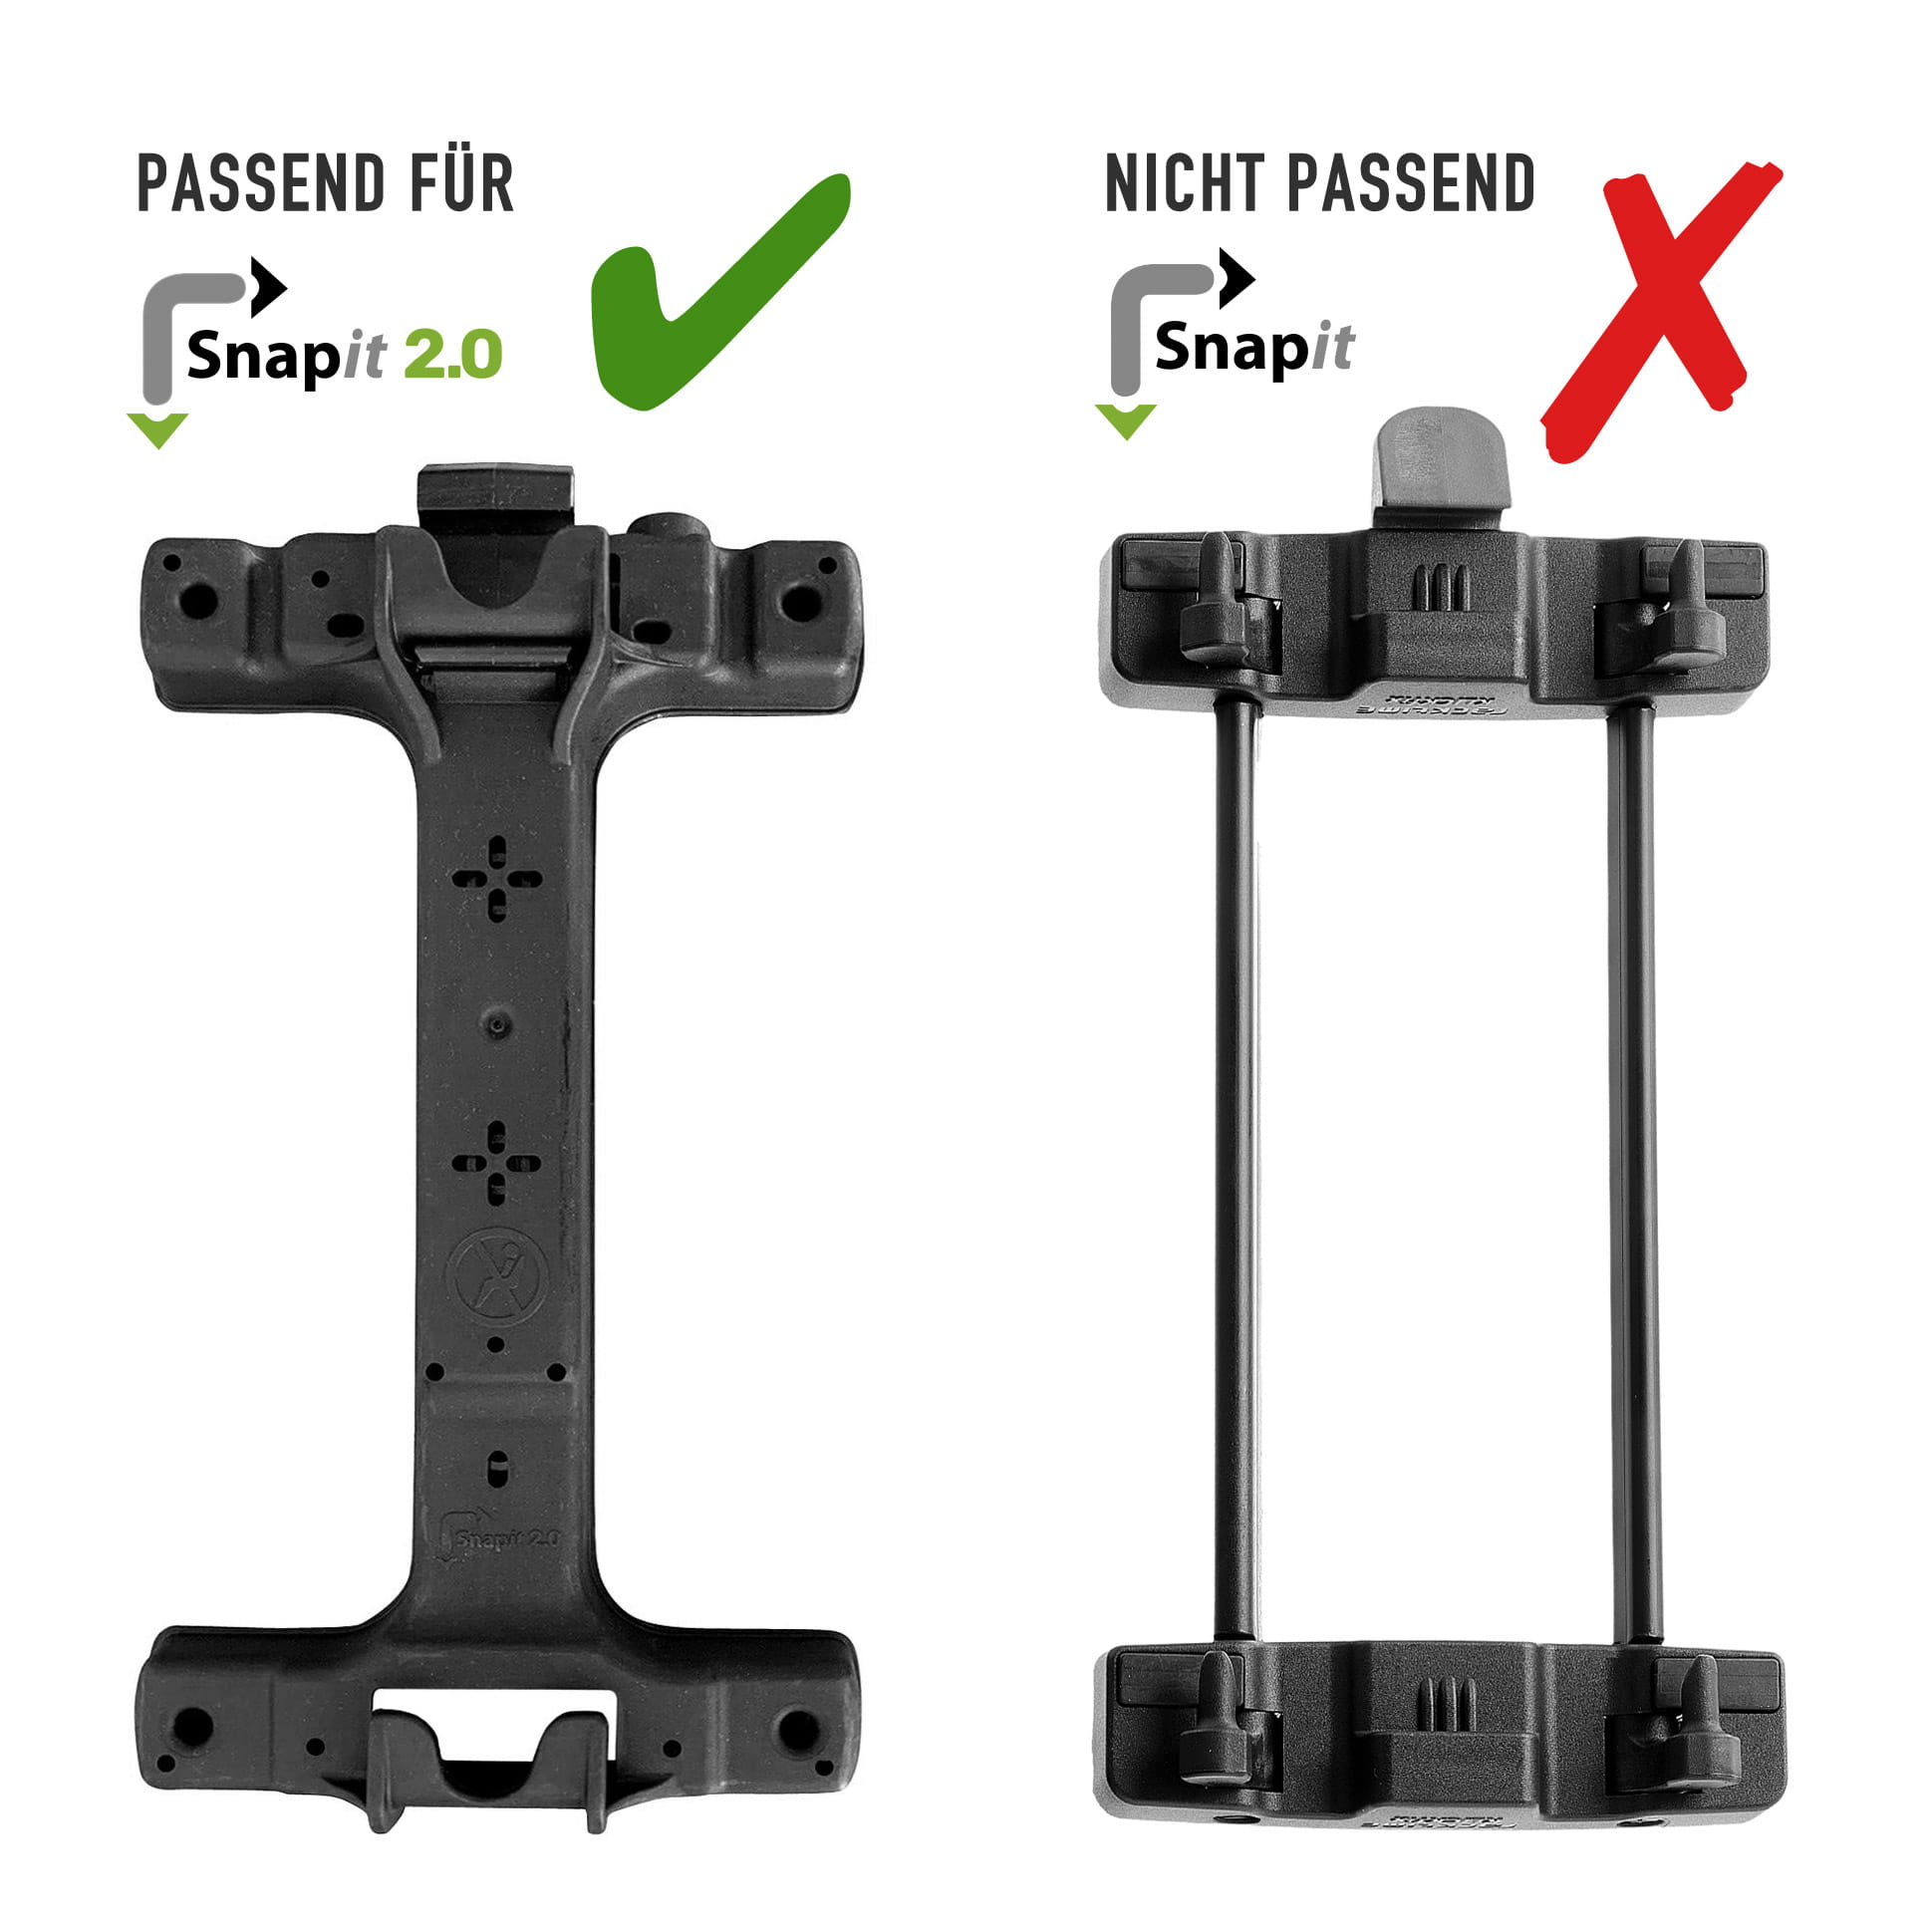 Racktime Snapit 2.0 Connect base plate 37001